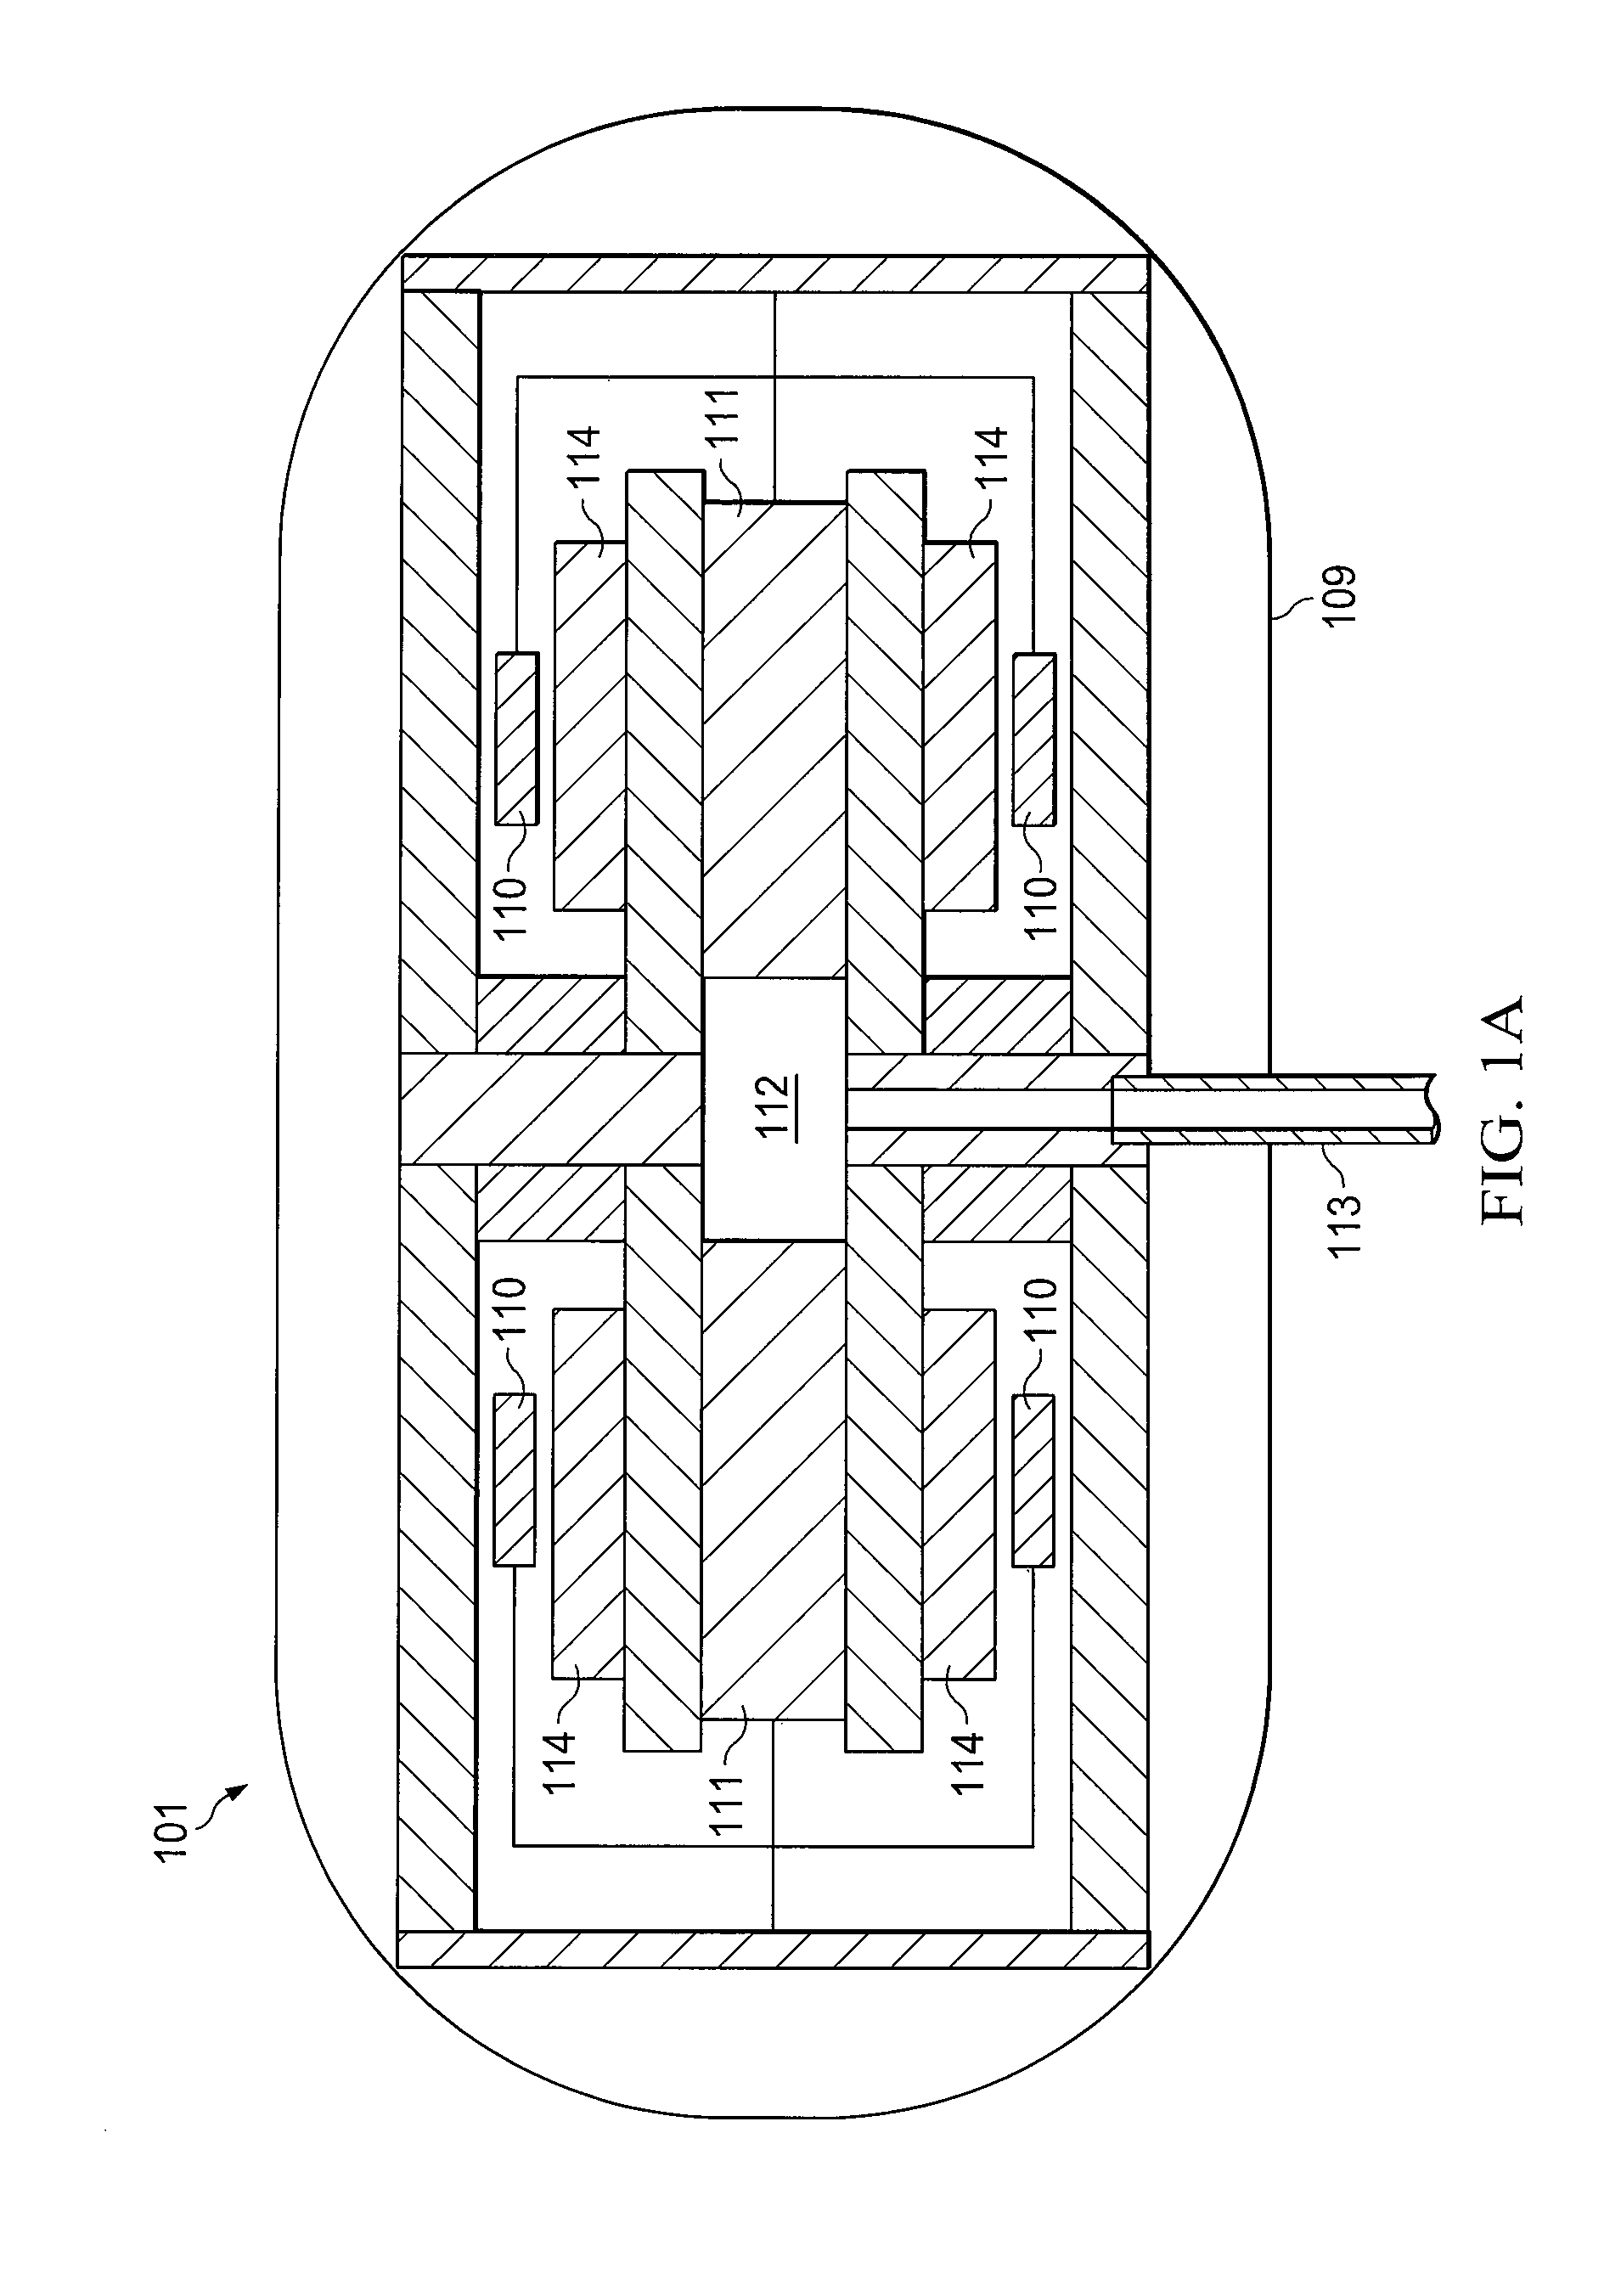 Frequency-matched cryocooler scaling for low-cost, minimal disturbance space cooling